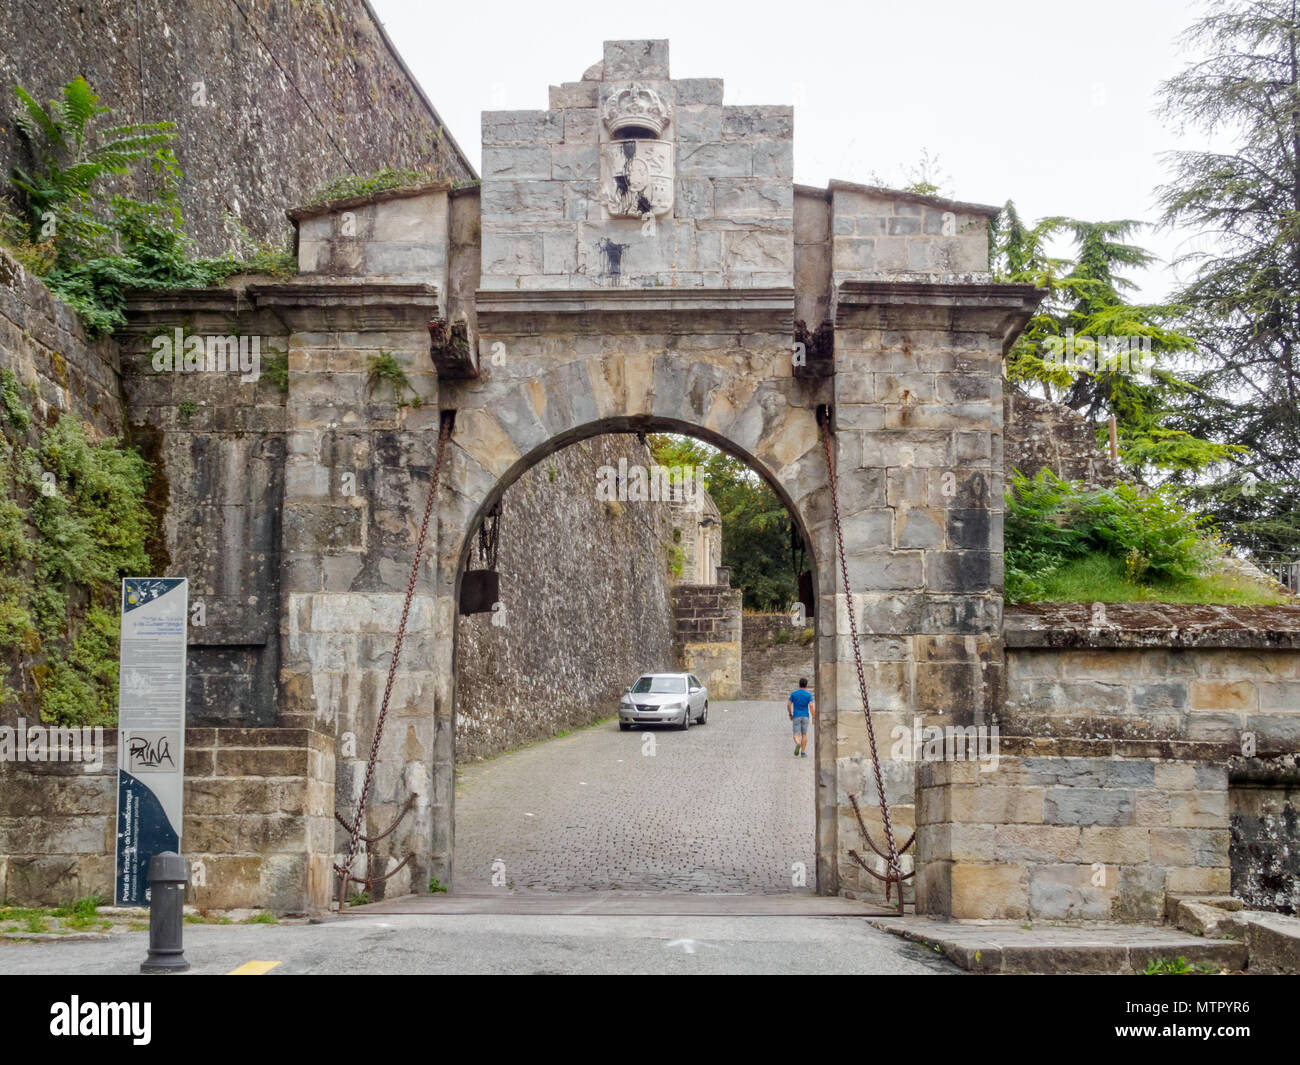 Arriving through the medieval French Gate (Portal de Francia) - Pamplona, Navarre, Spain Stock Photo